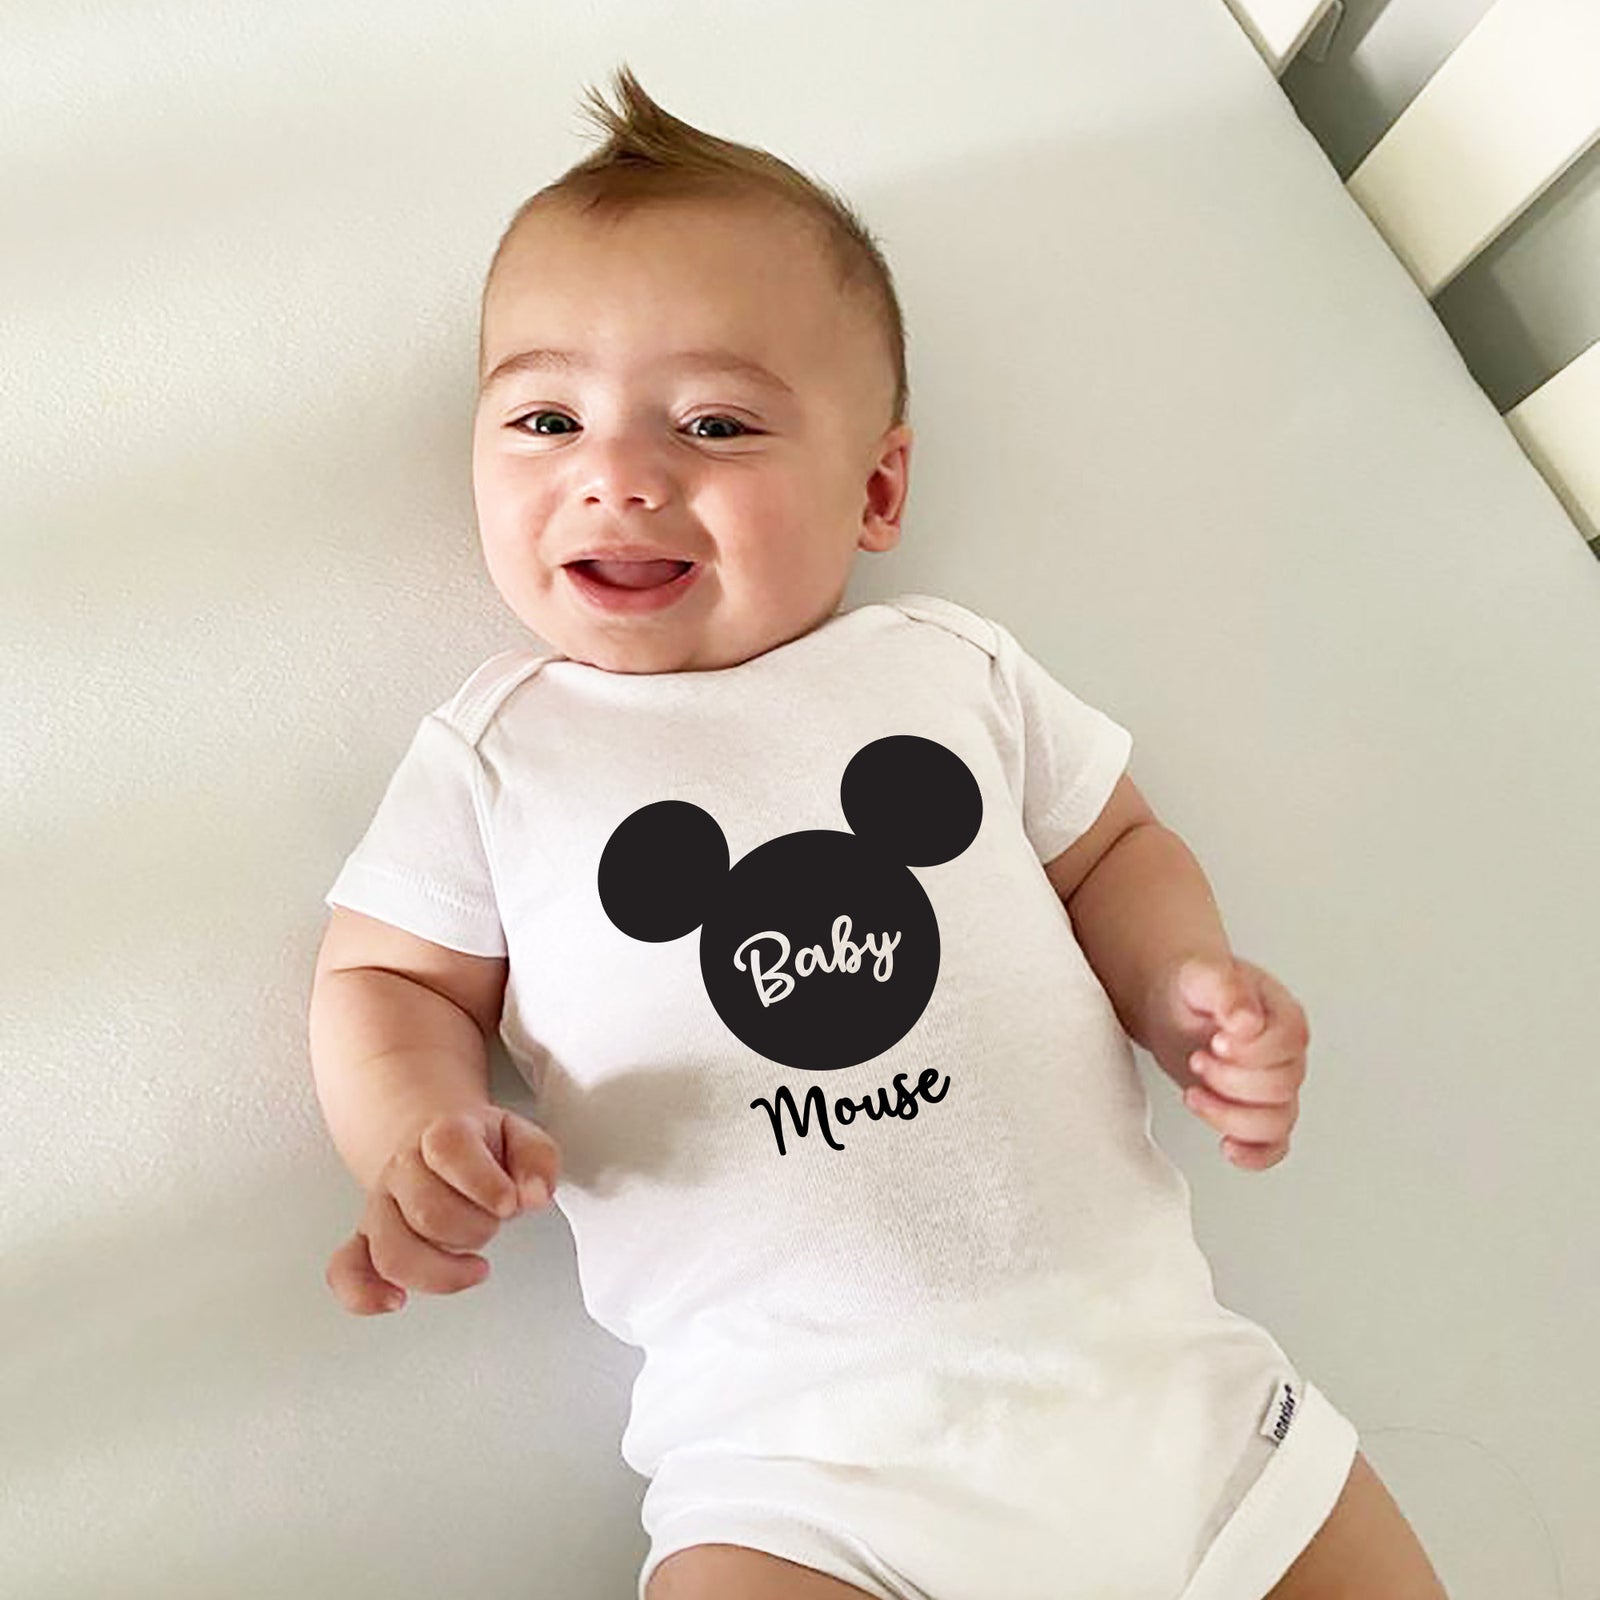 Baby Mickey Mouse -  Infant Onesie - First Time Visit - Family Matching T Shirts